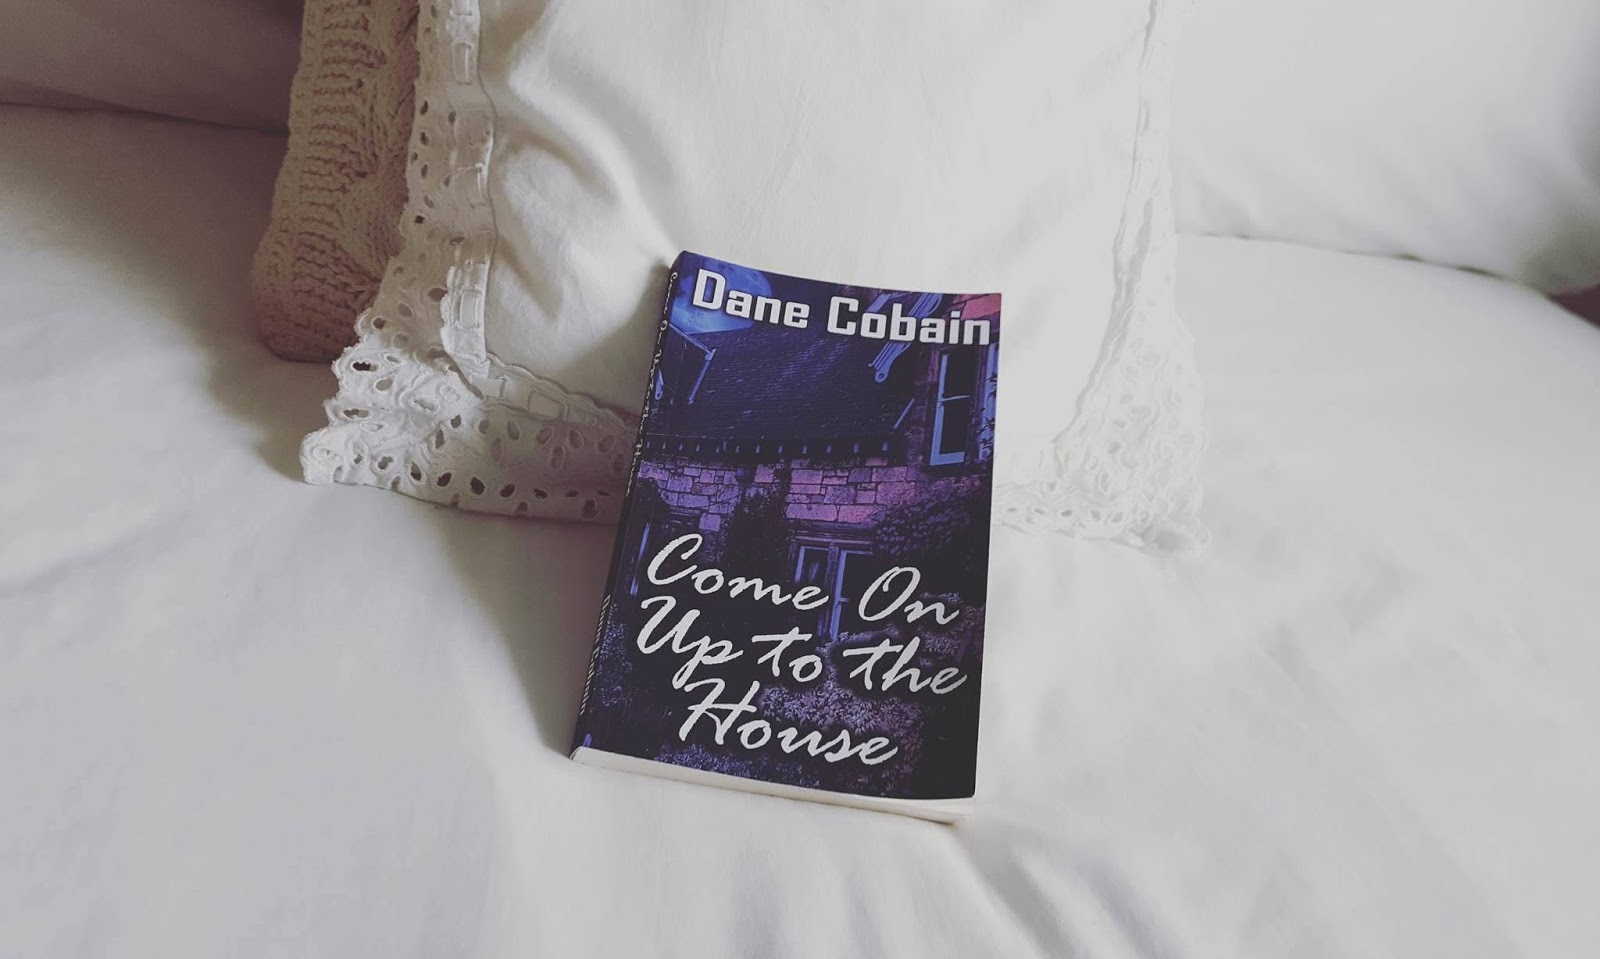 Book Review || Come On up to the House by Dane Cobain